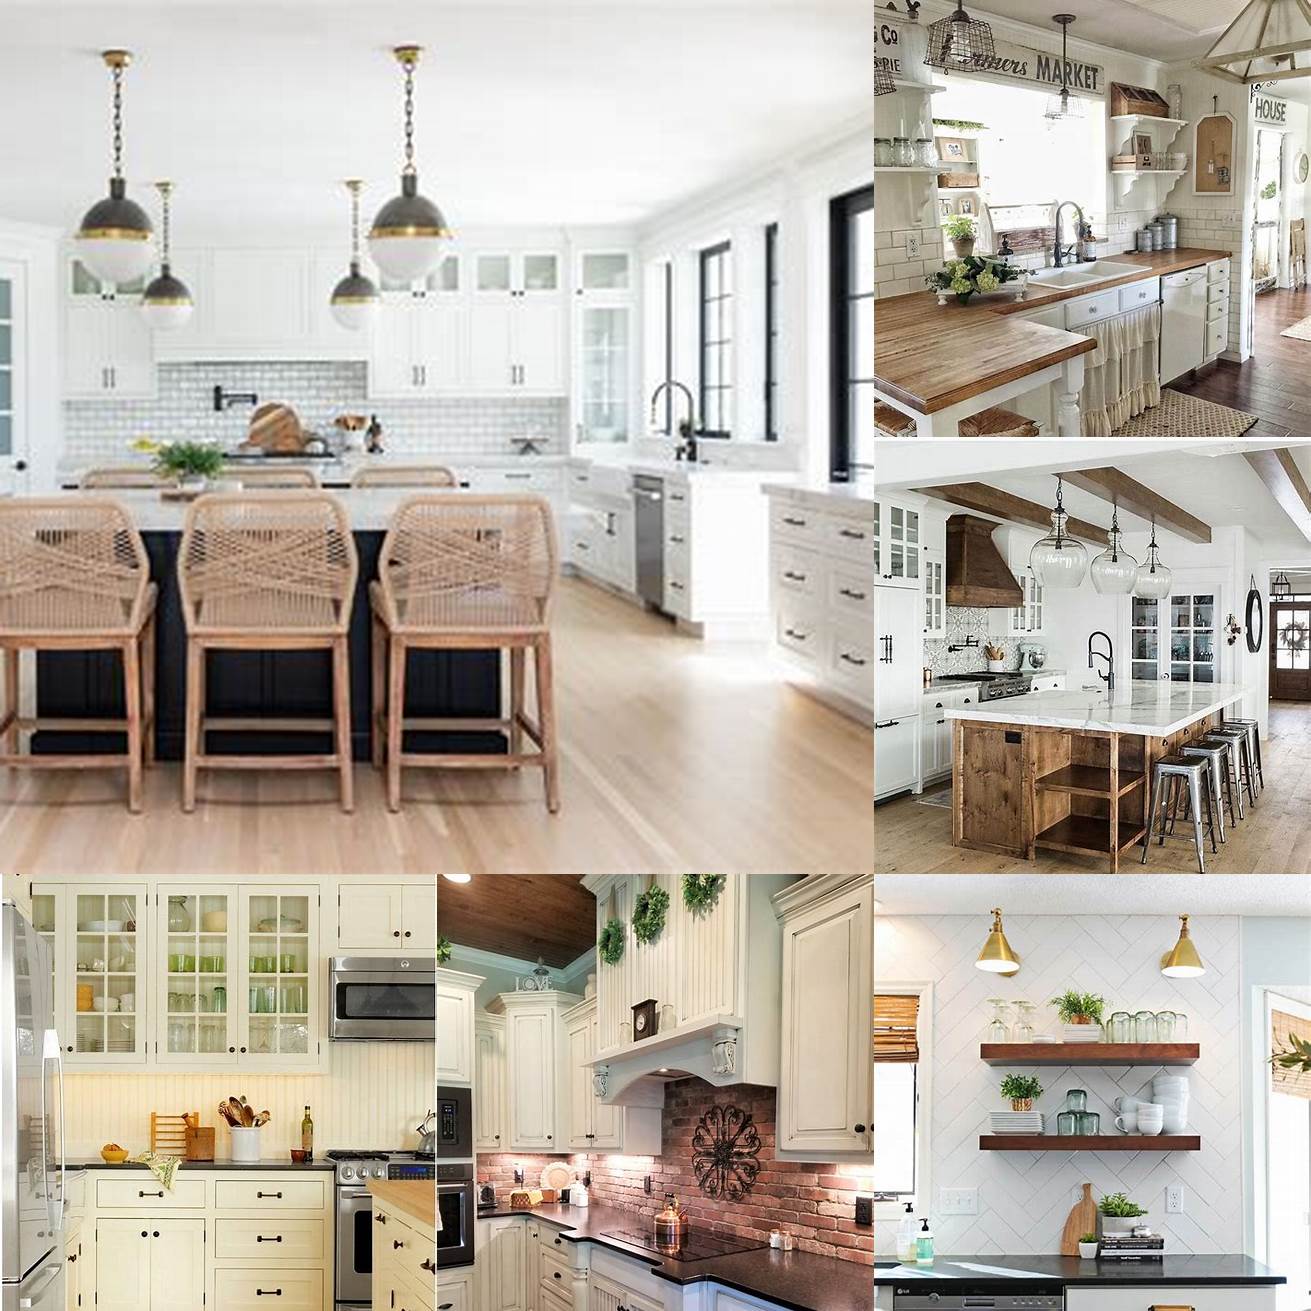 3 Farmhouse Chic - A bright and airy kitchen with white cabinets open shelving and a patterned tile backsplash The wooden accents and colorful dishes add personality and warmth